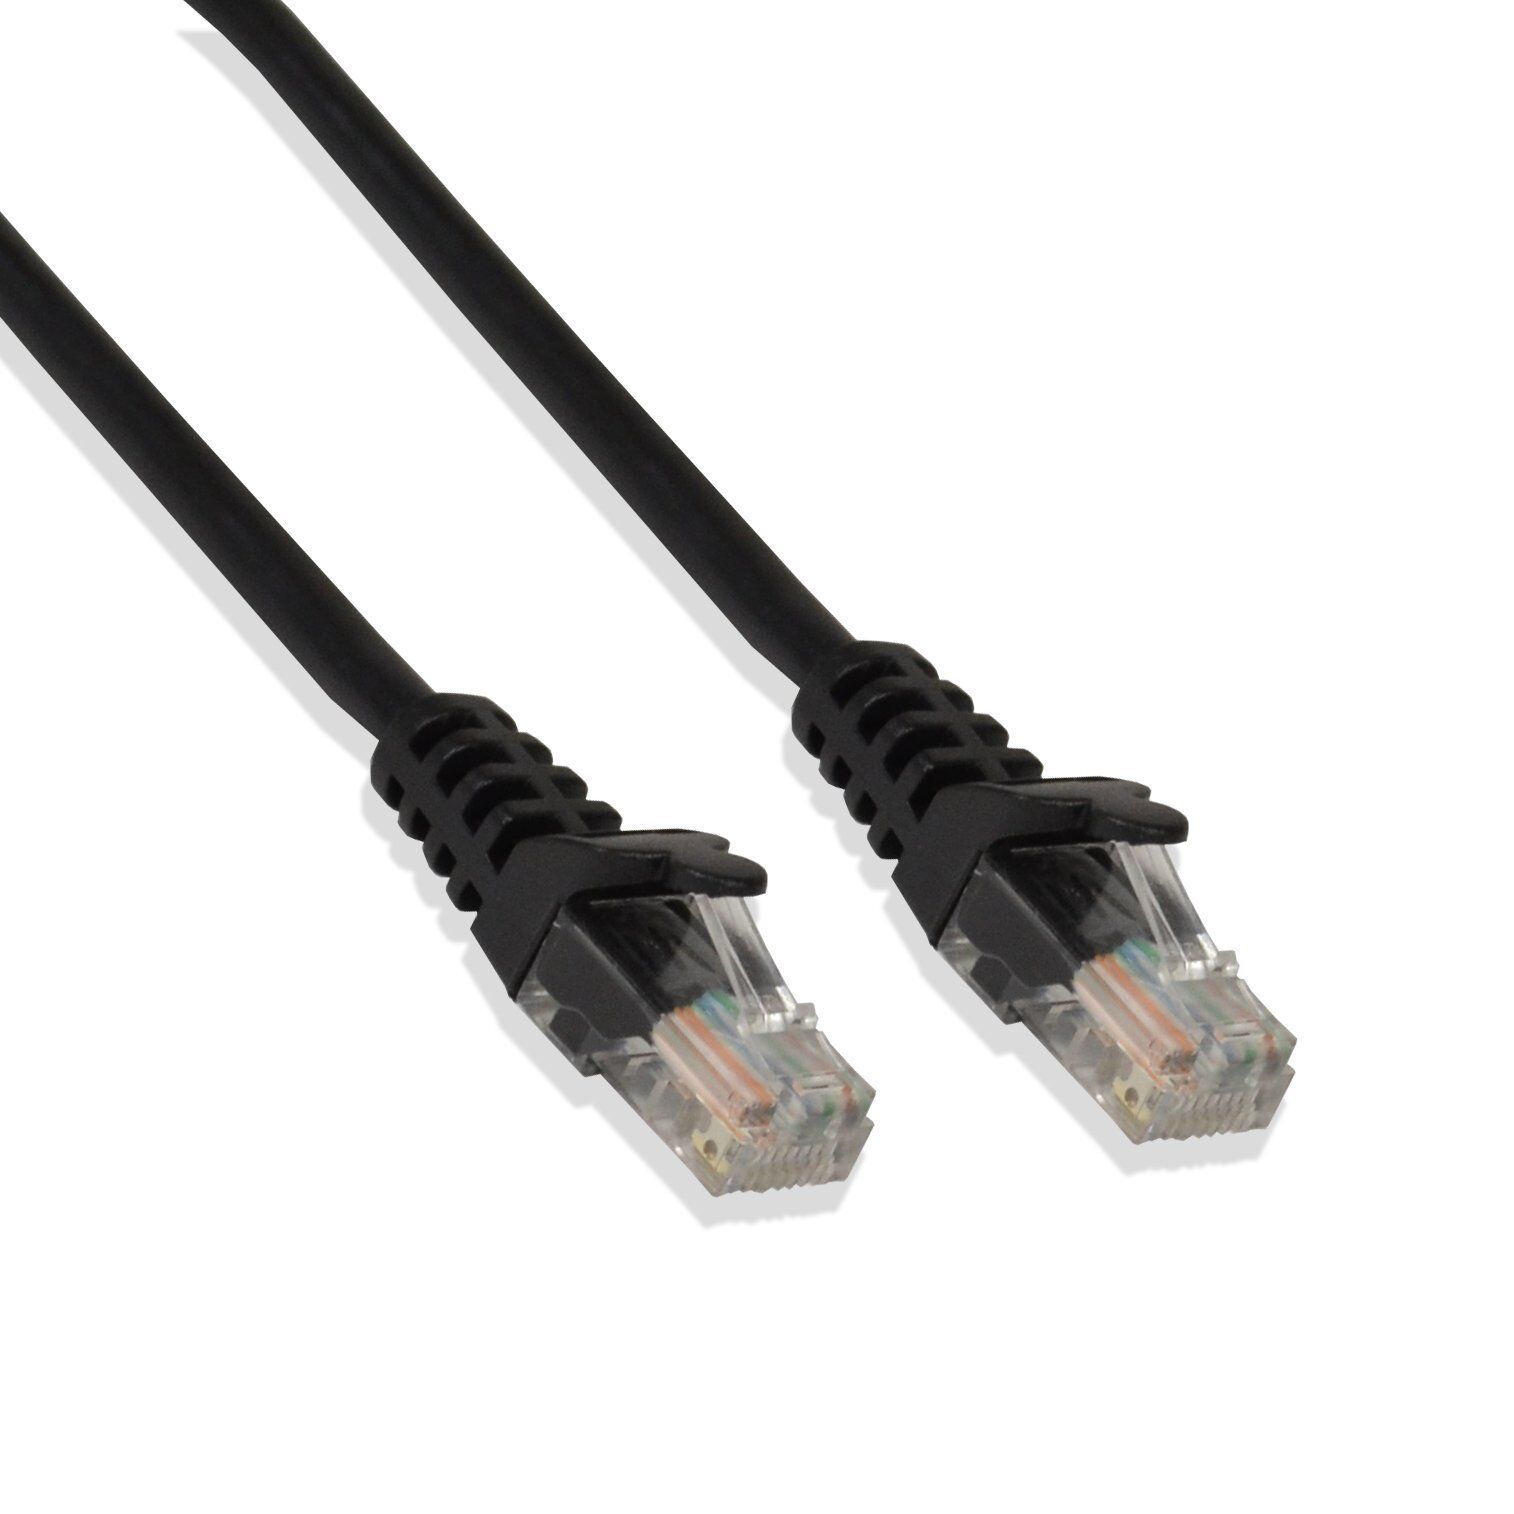 3FT Cat5e UTP Ethernet Network Patch Cable RJ45 Lan Wire Black (25 Pack)